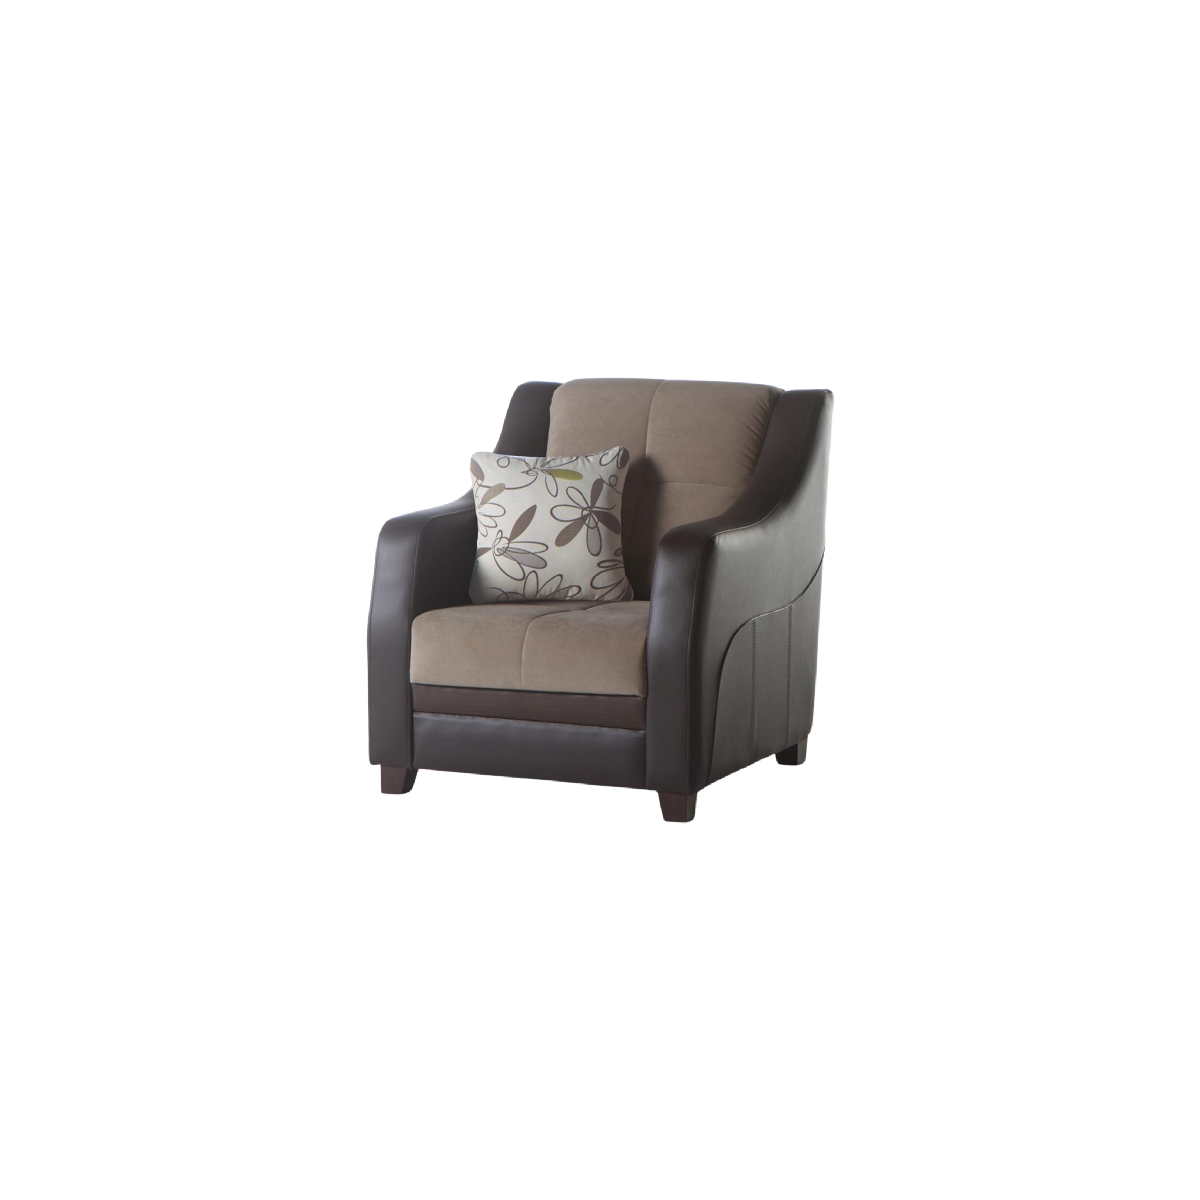 Ultra Armchair - Home Store Furniture